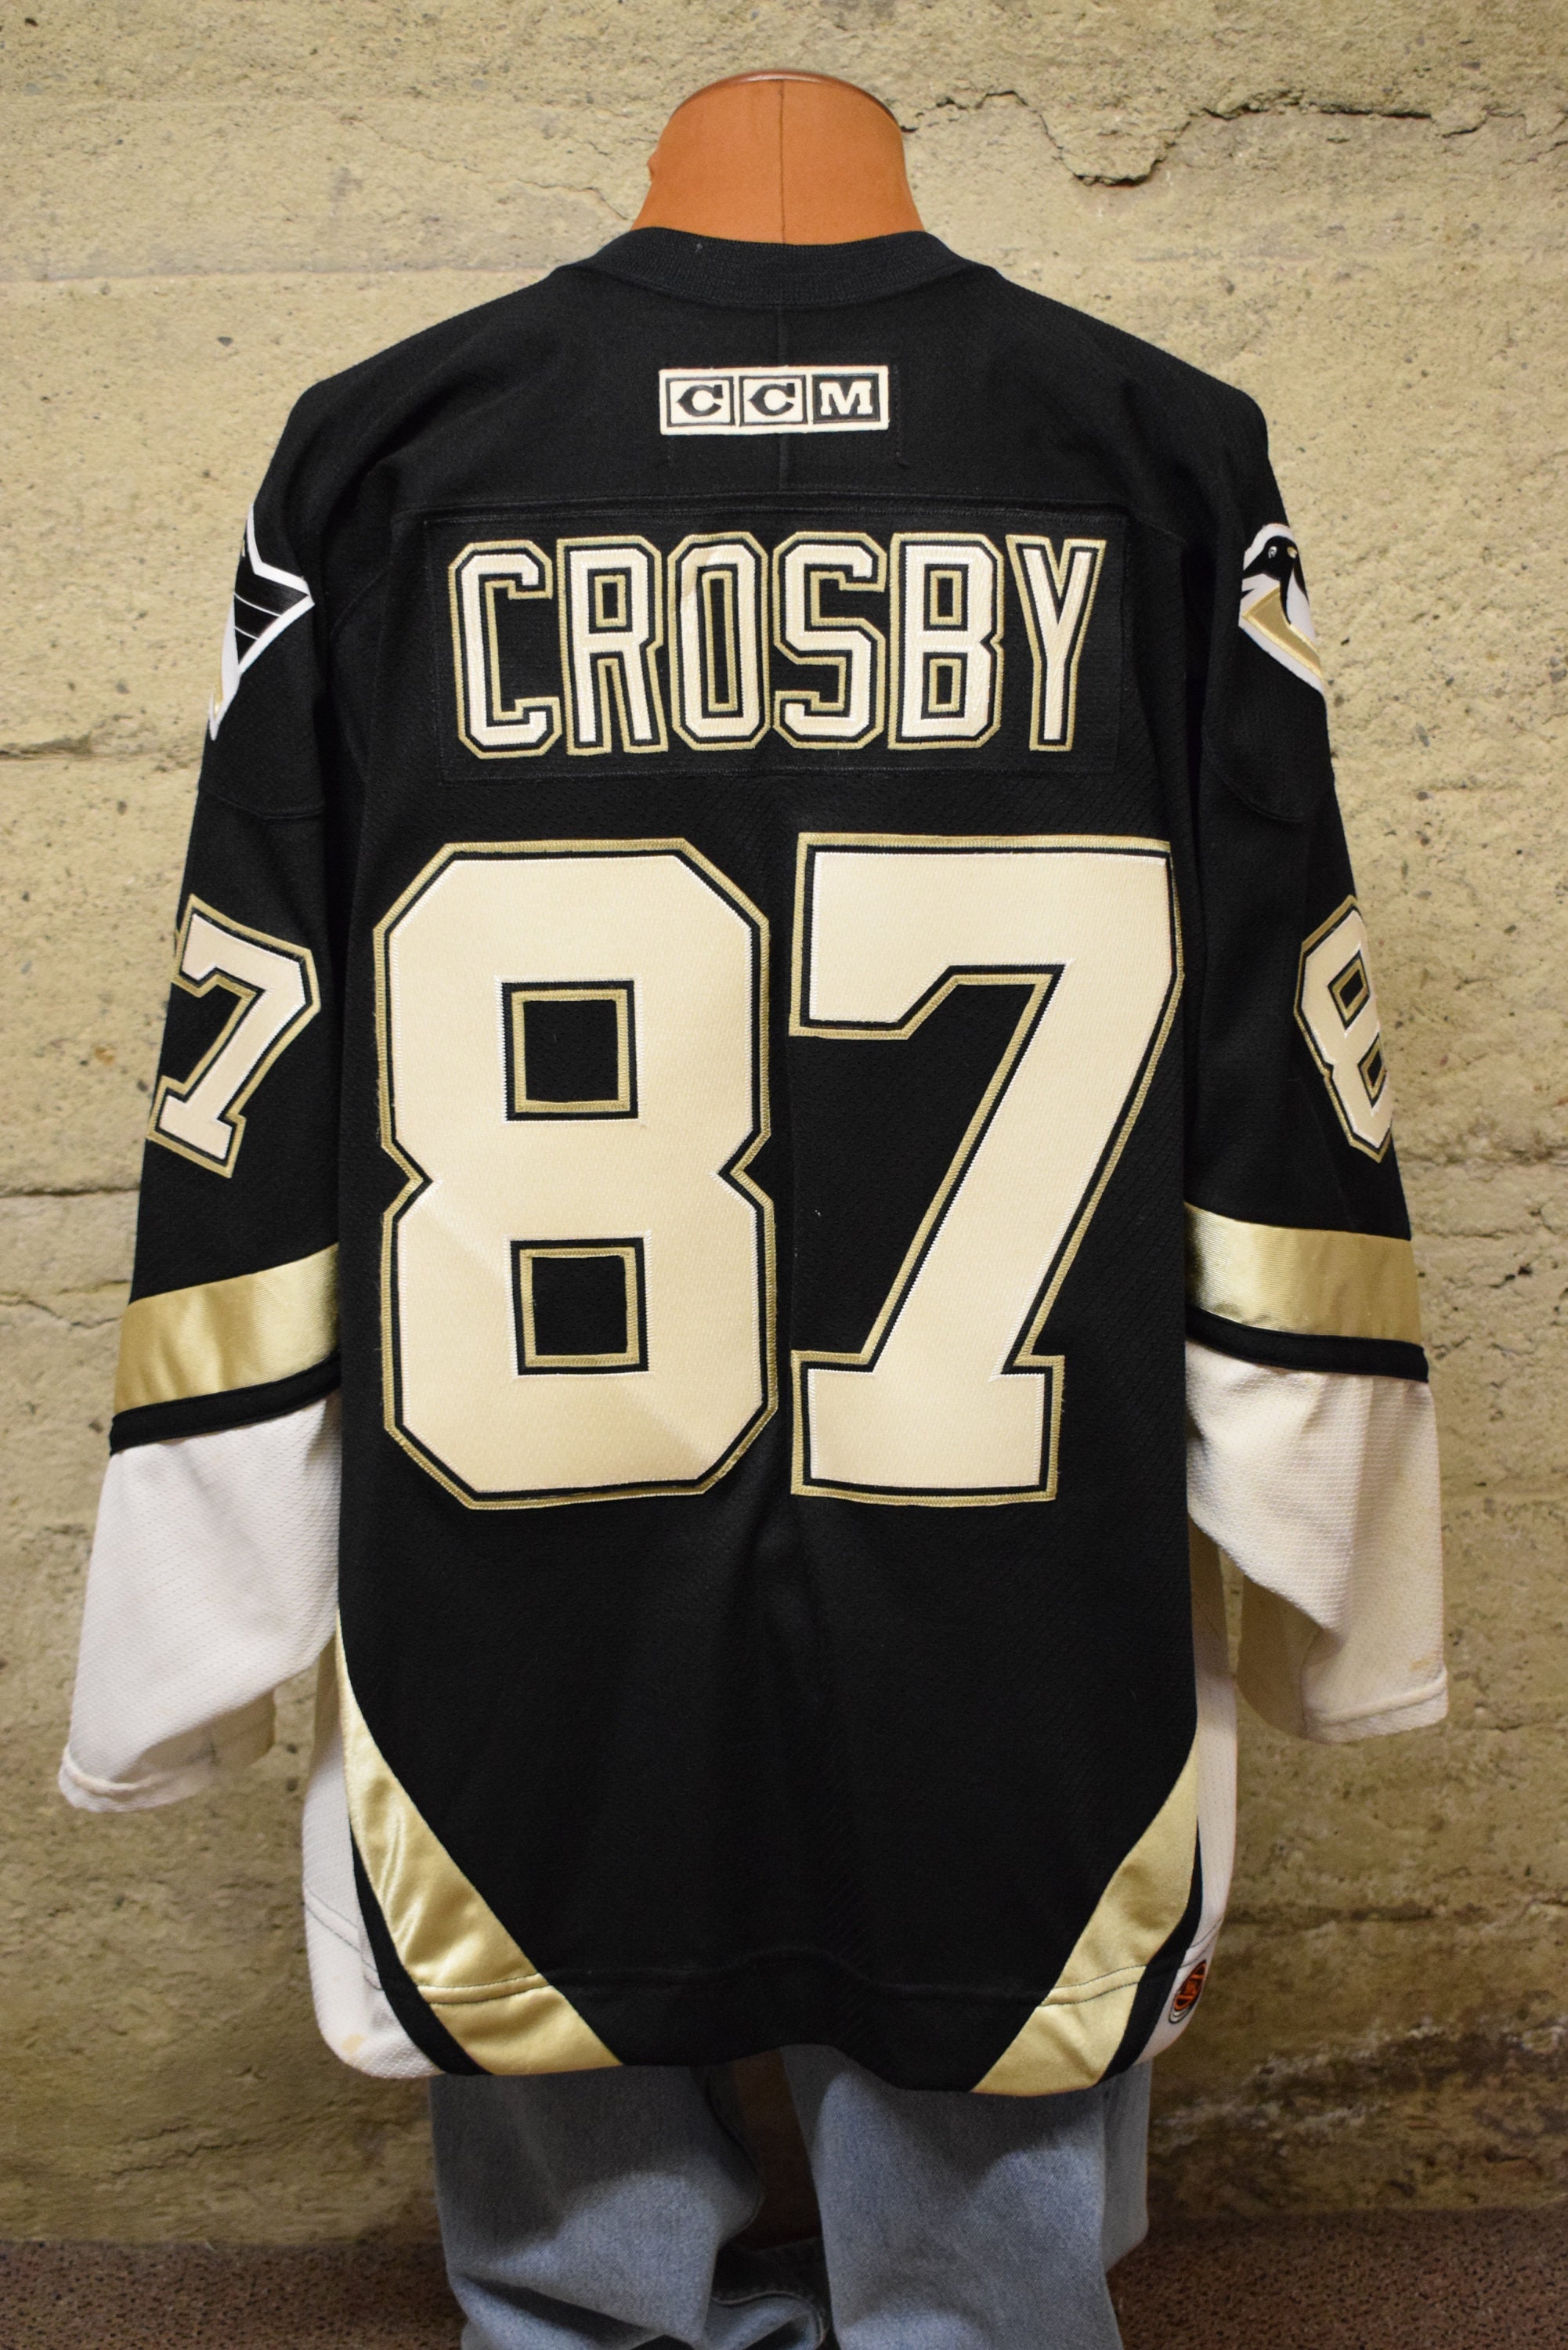 Men's Pittsburgh Penguins Sidney Crosby CCM Authentic Throwback Jersey -  Black